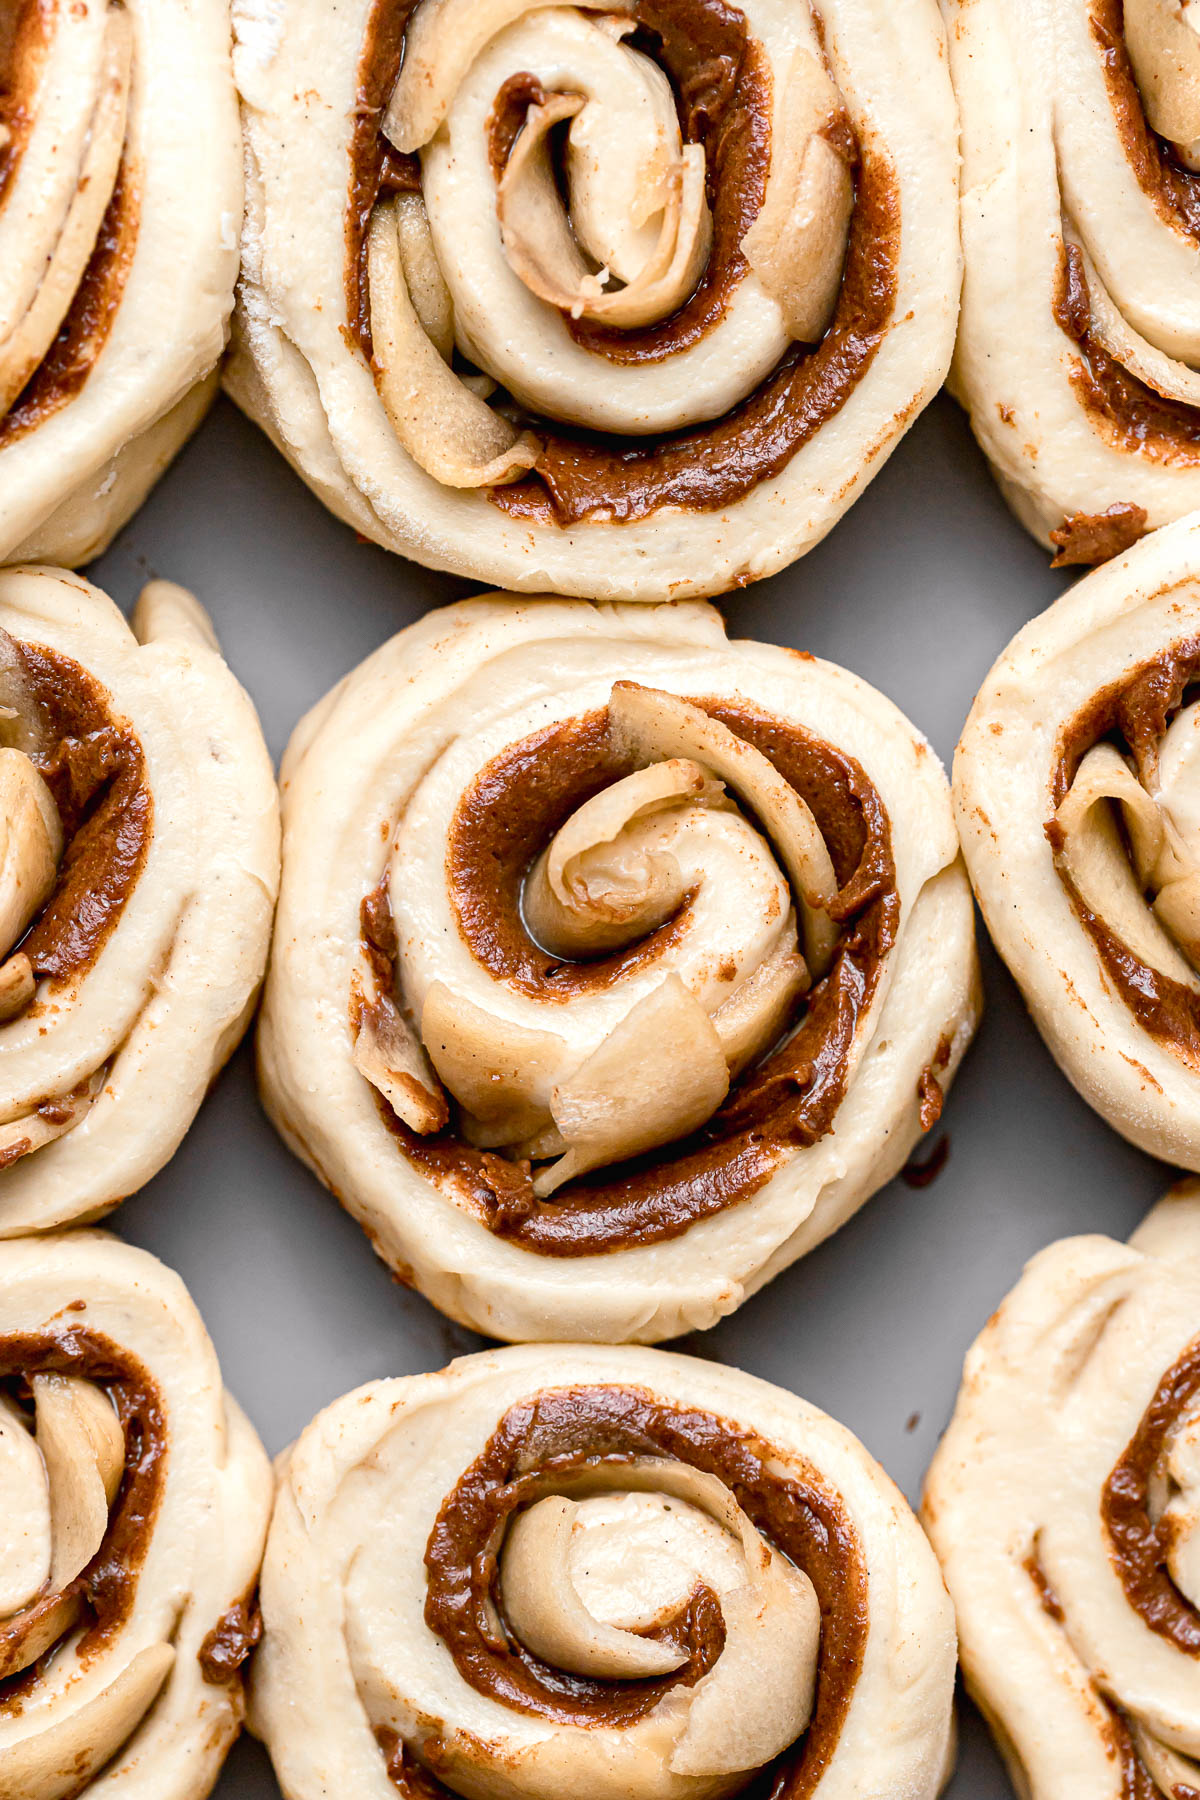 proofed cinnamon rolls with apple pie filling.